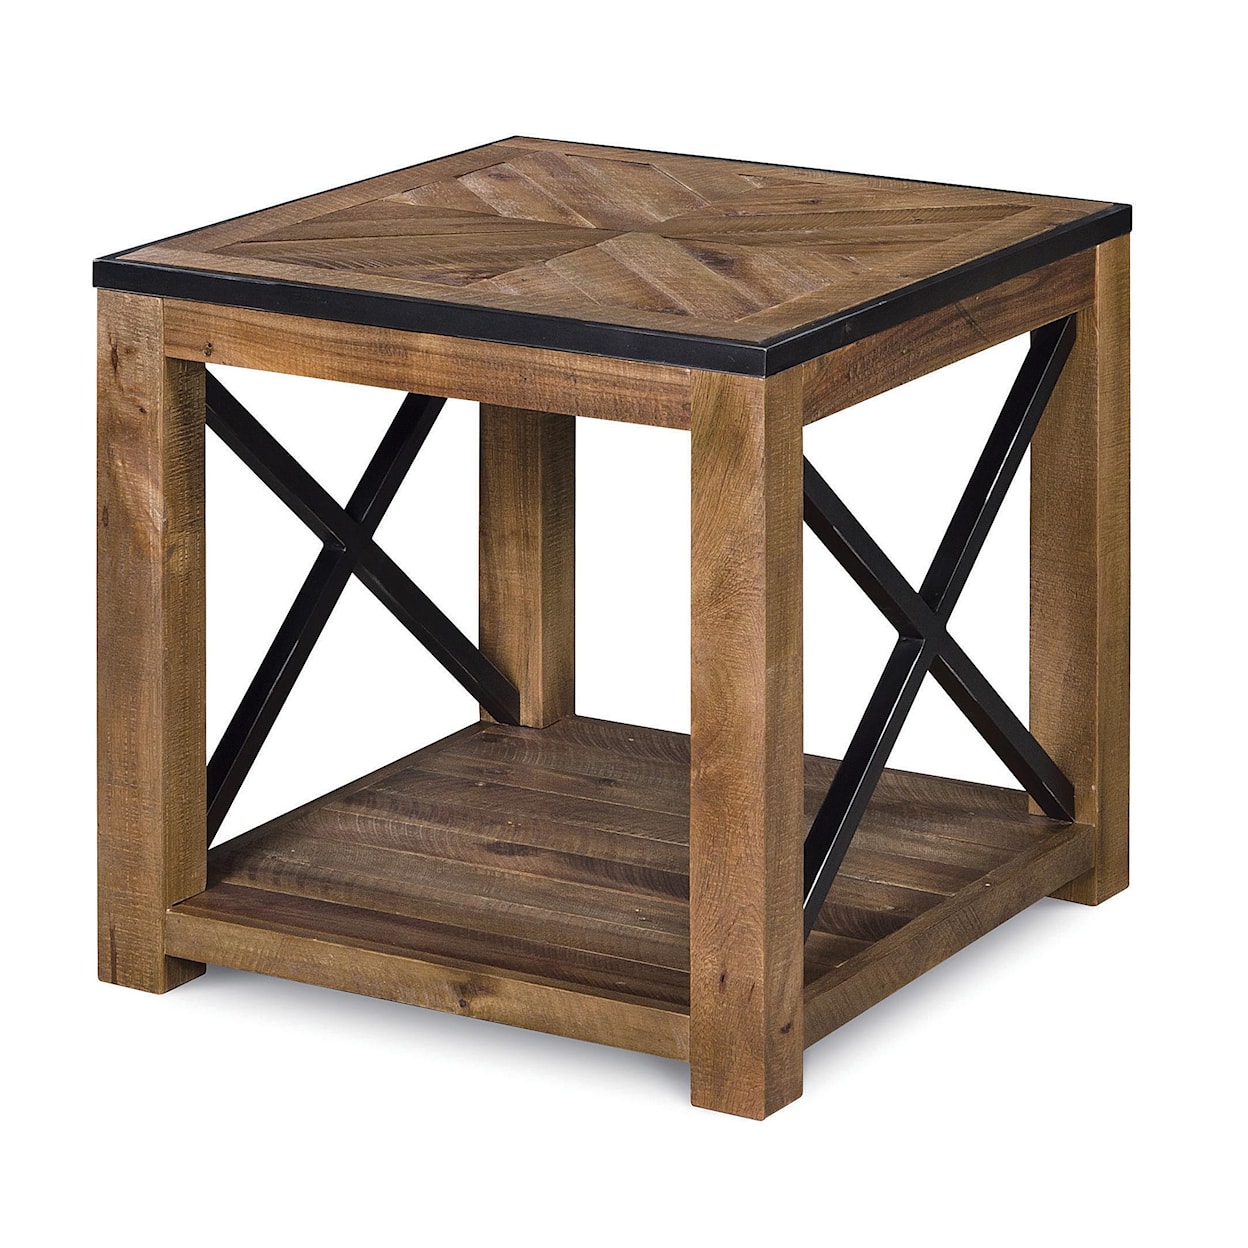 Magnussen Home Penderton Occasional Tables Rectangular End Table